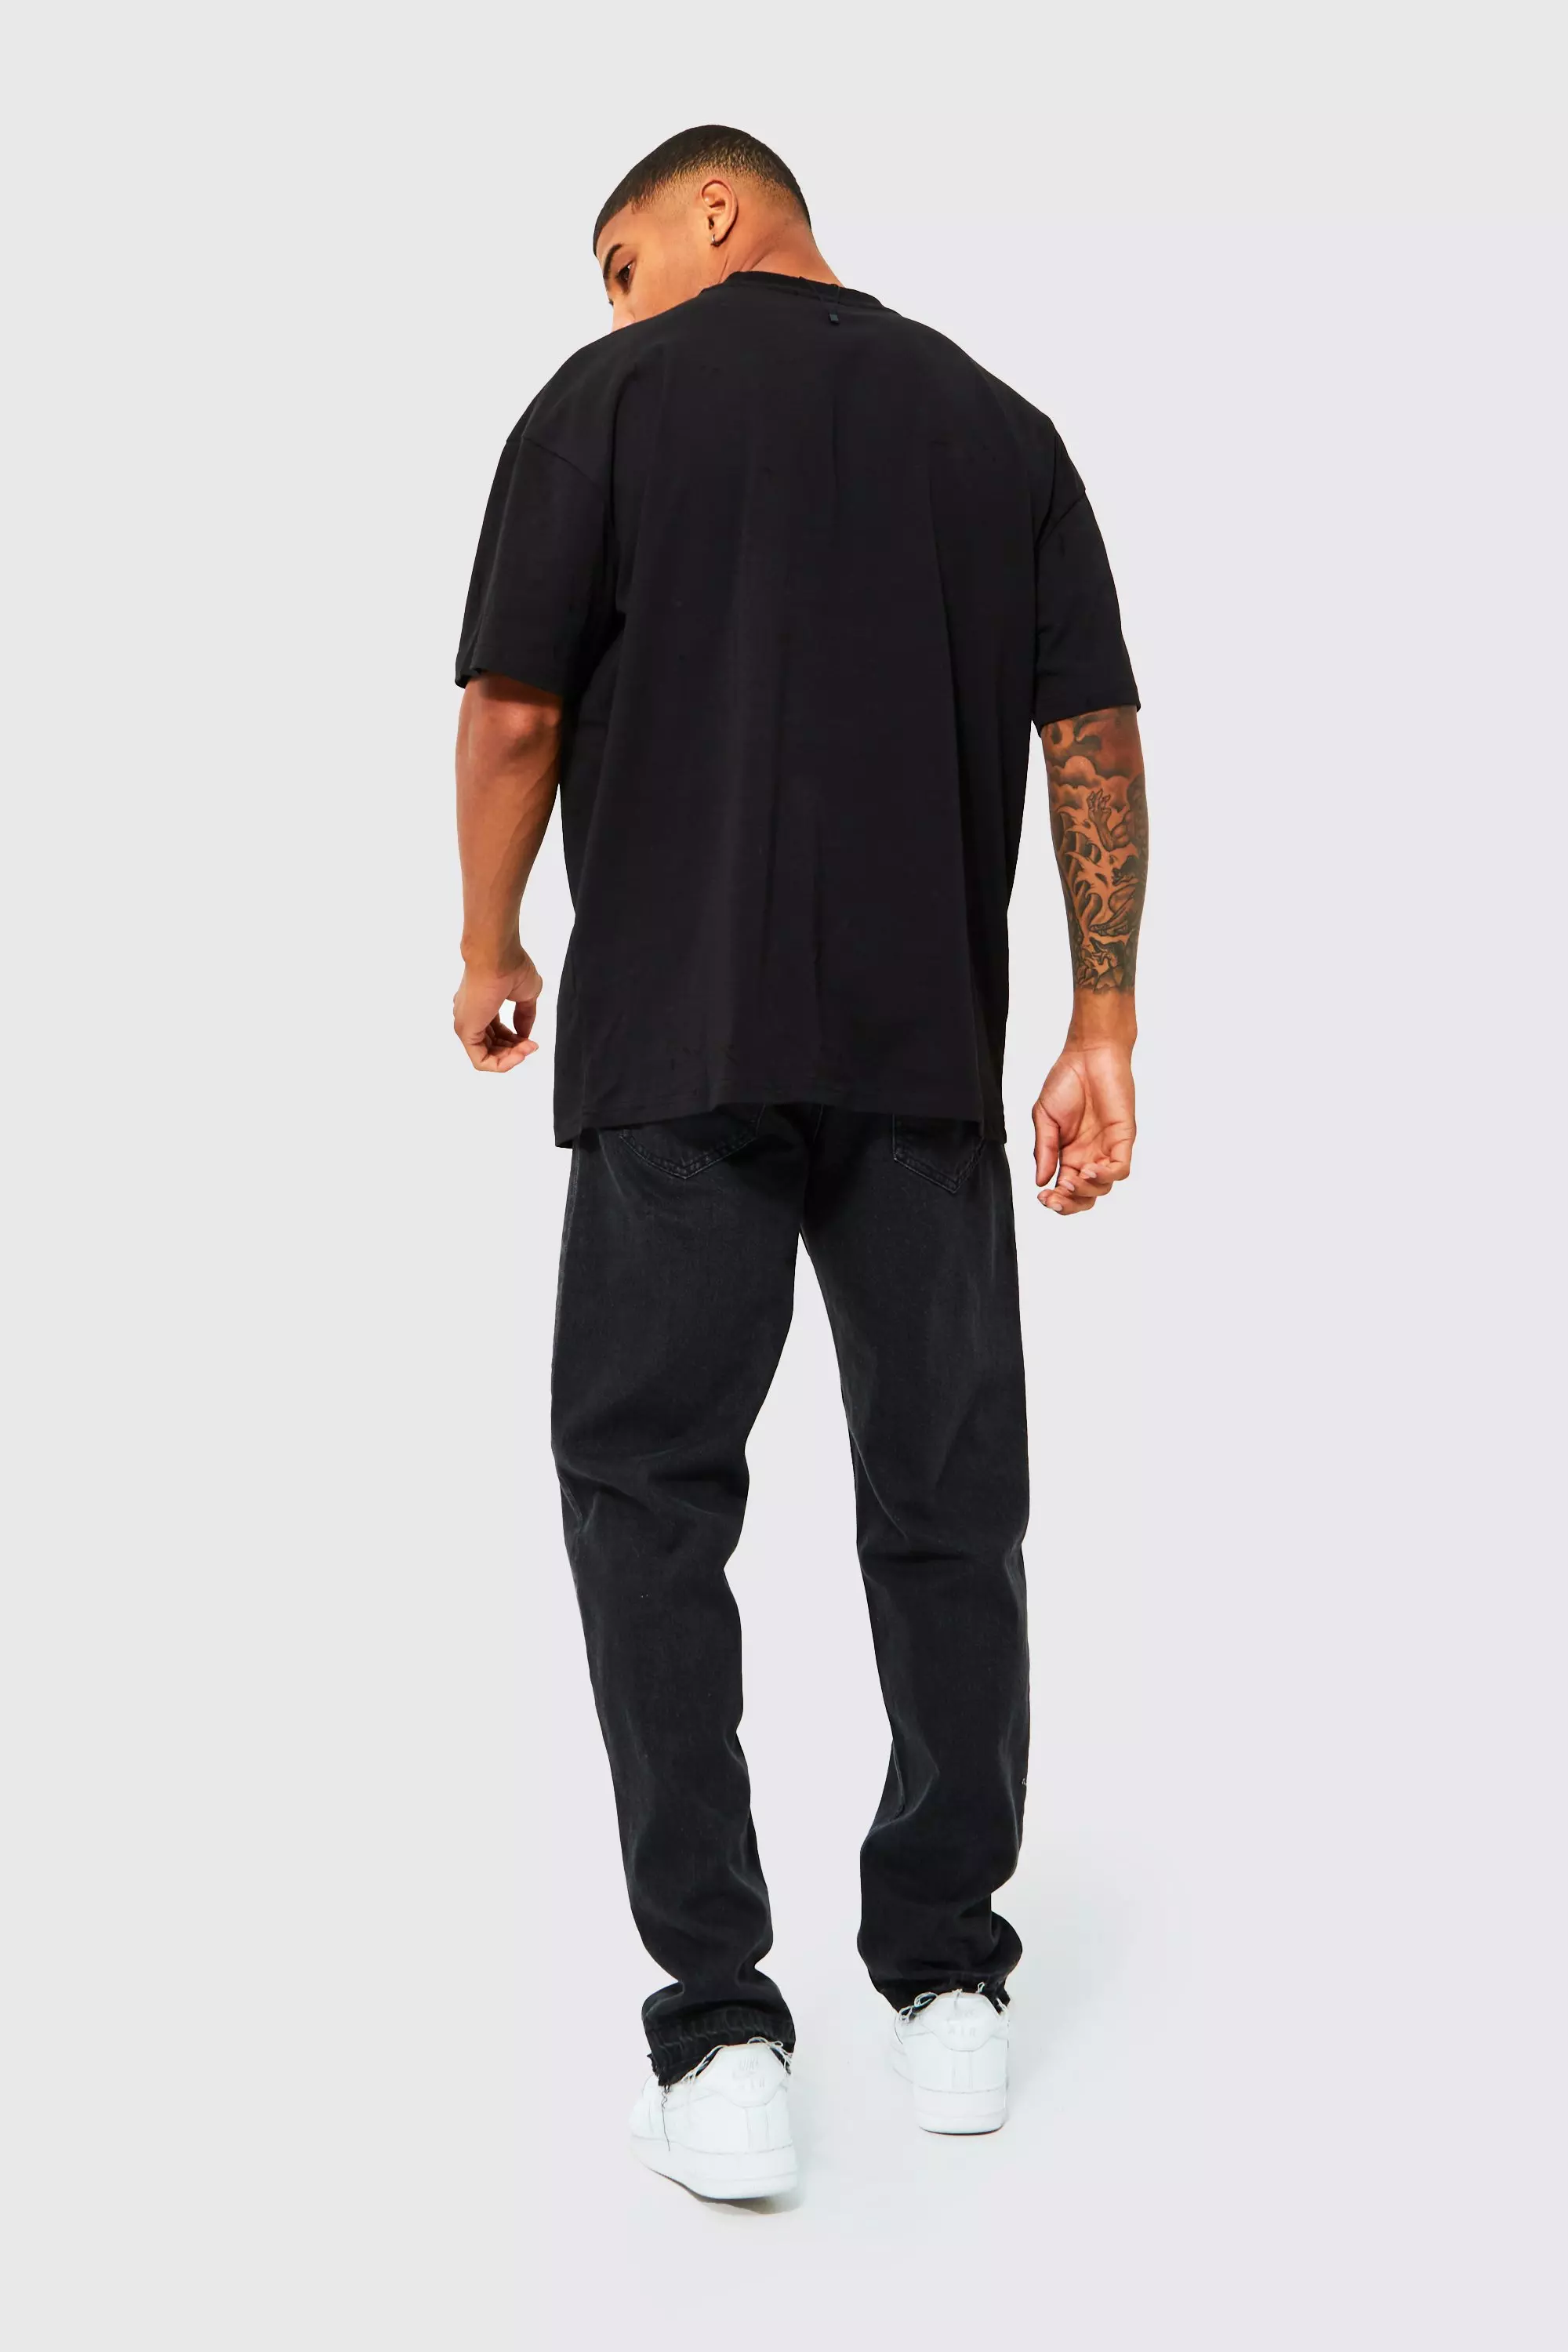 Oversized Black T-shirt Home – whyme.brand